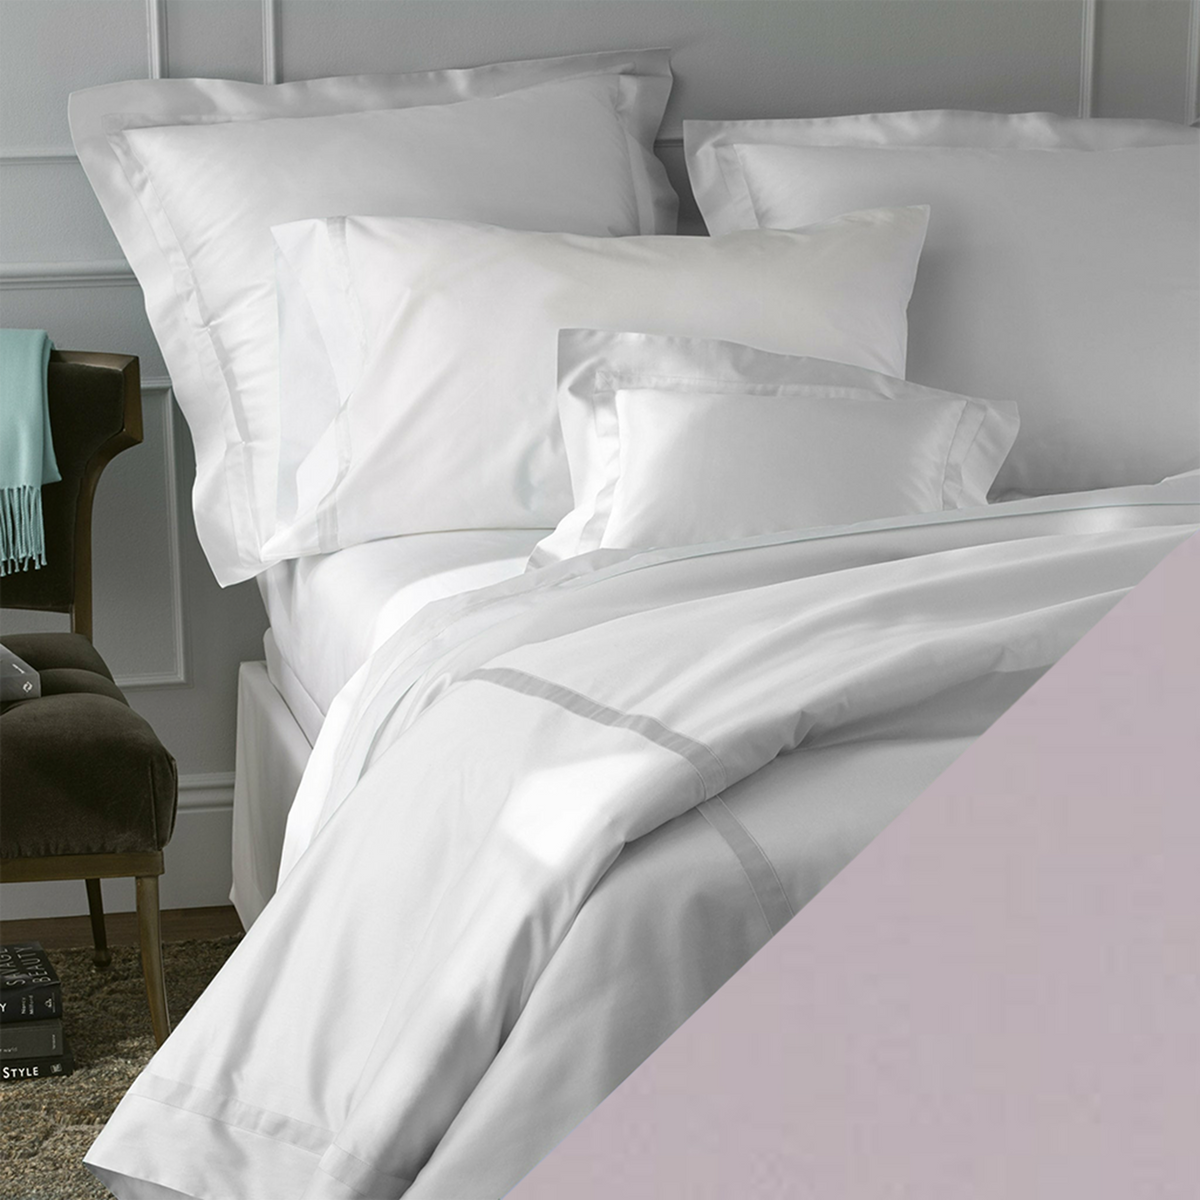 Matouk Nocturne Bedding Collection with Swatch in Deep Lilac Color